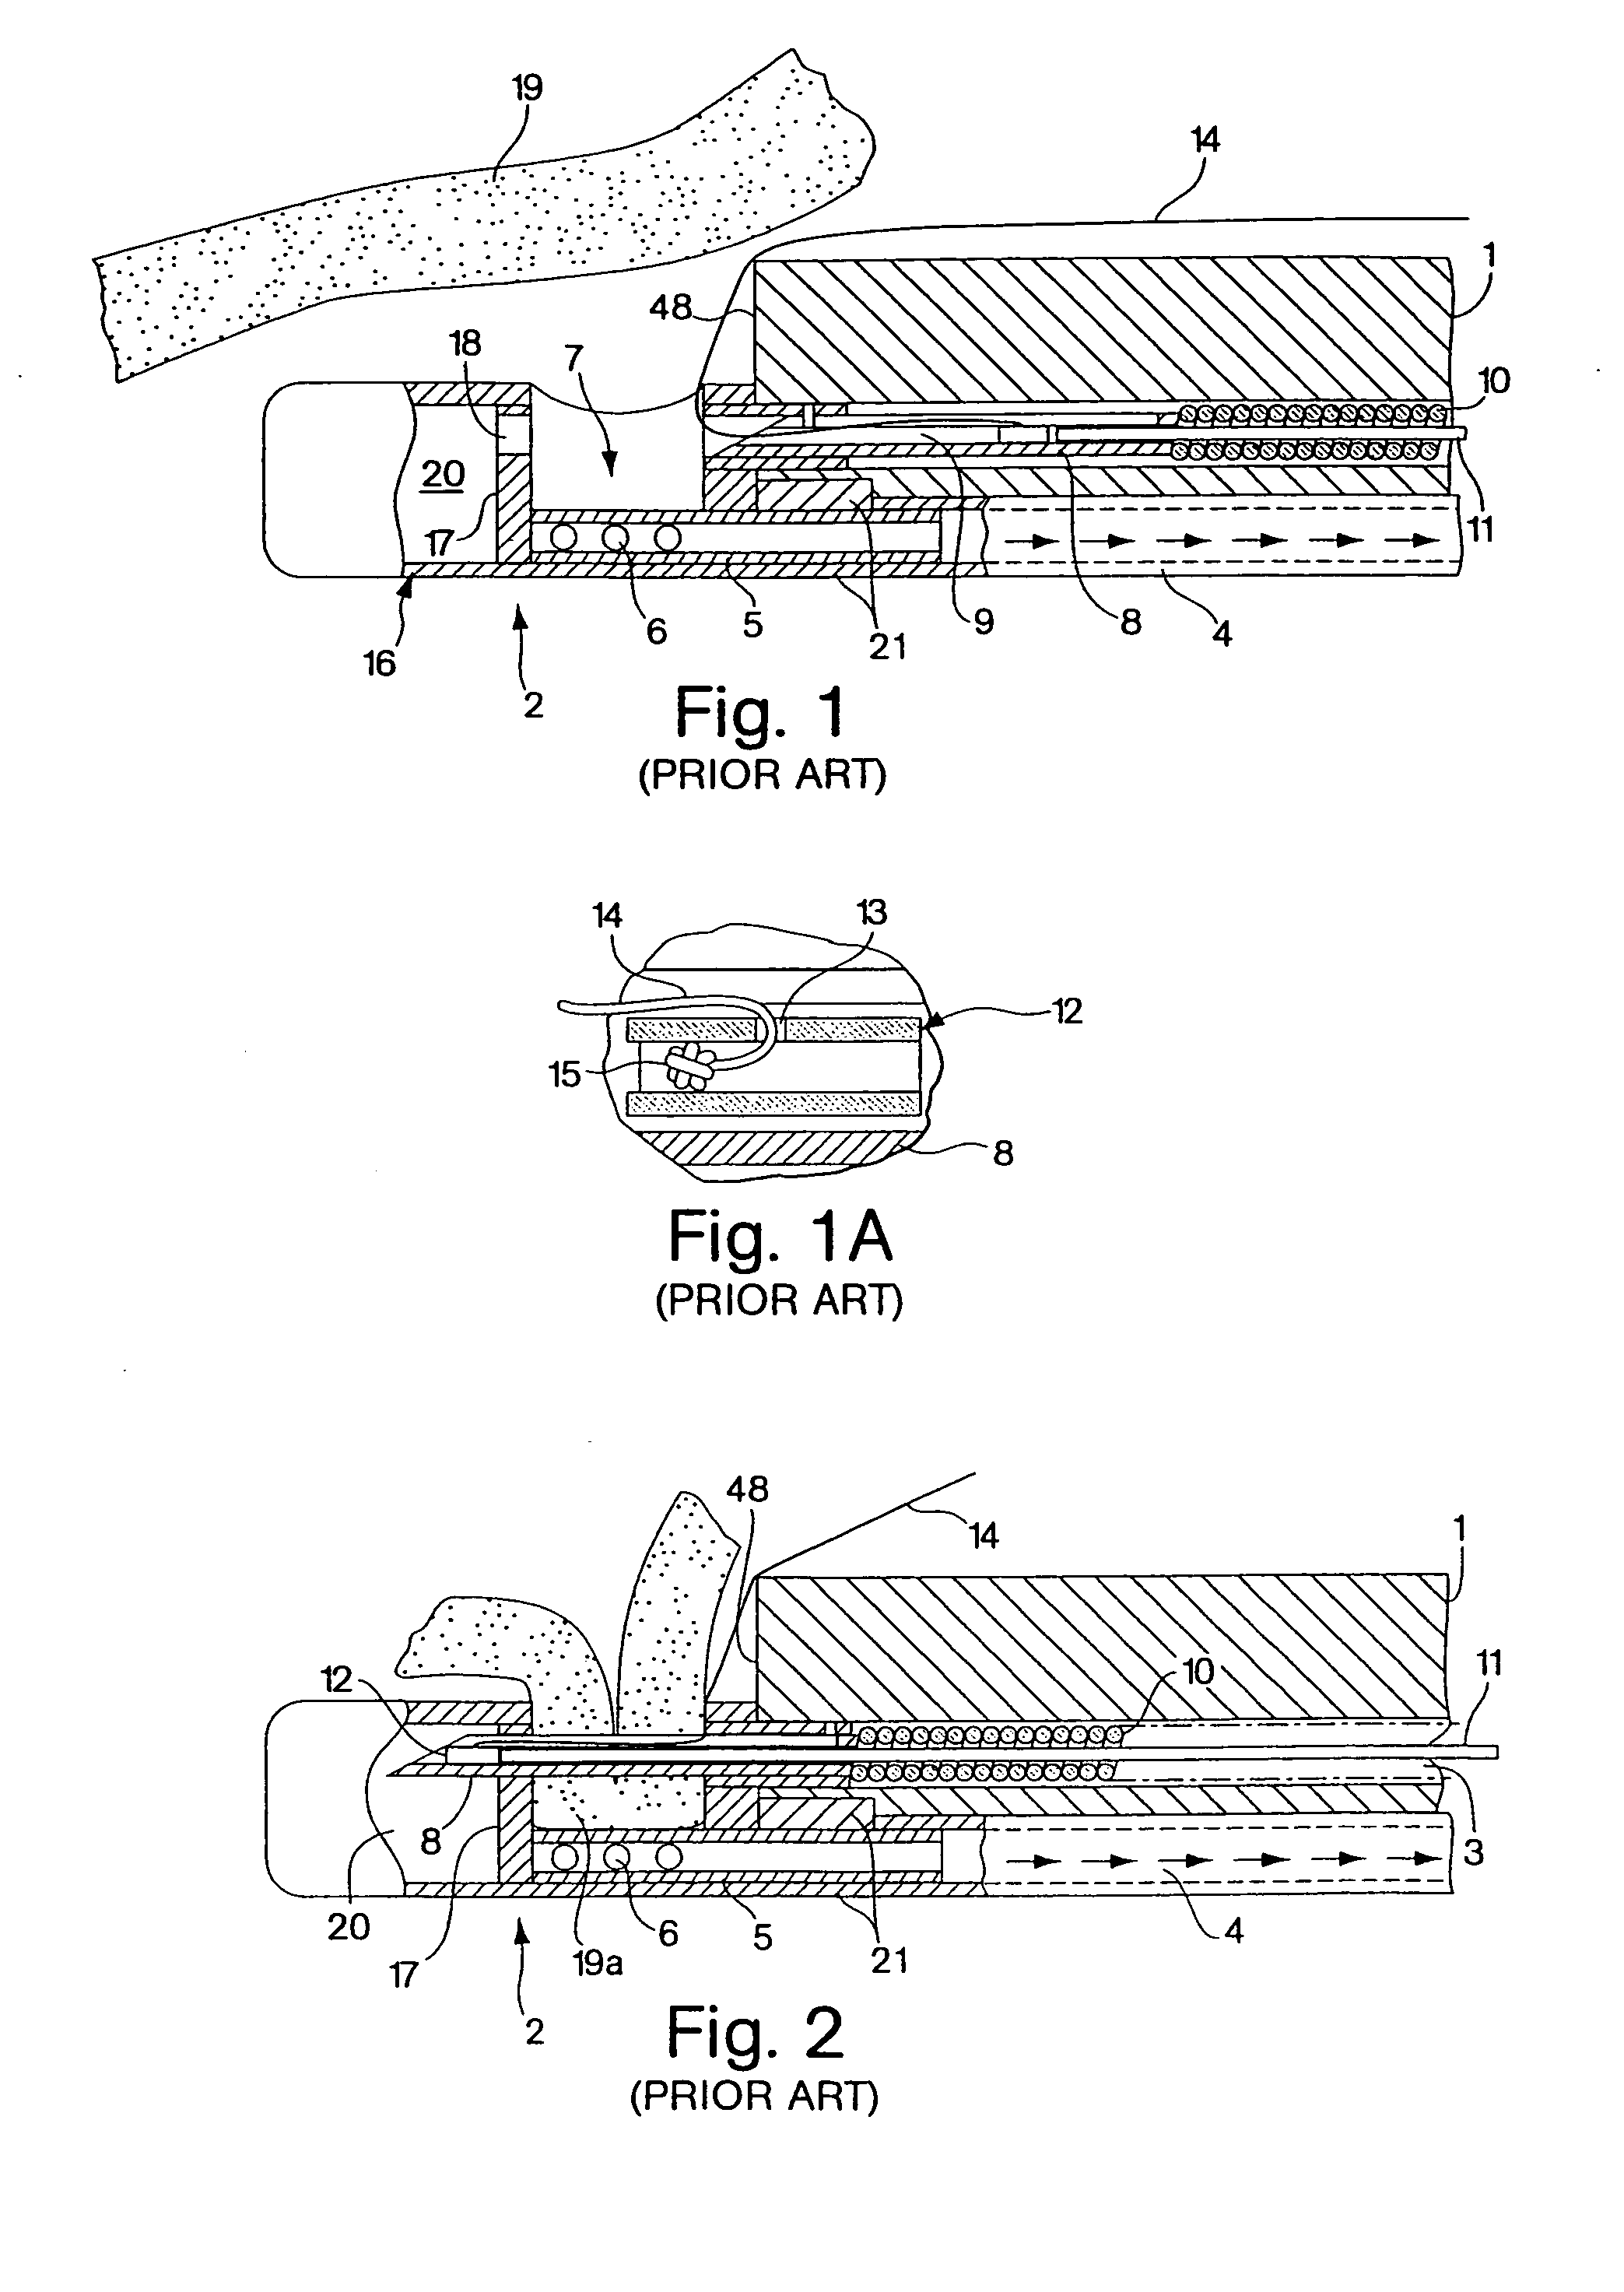 Endoscopic tissue apposition device with multiple suction ports